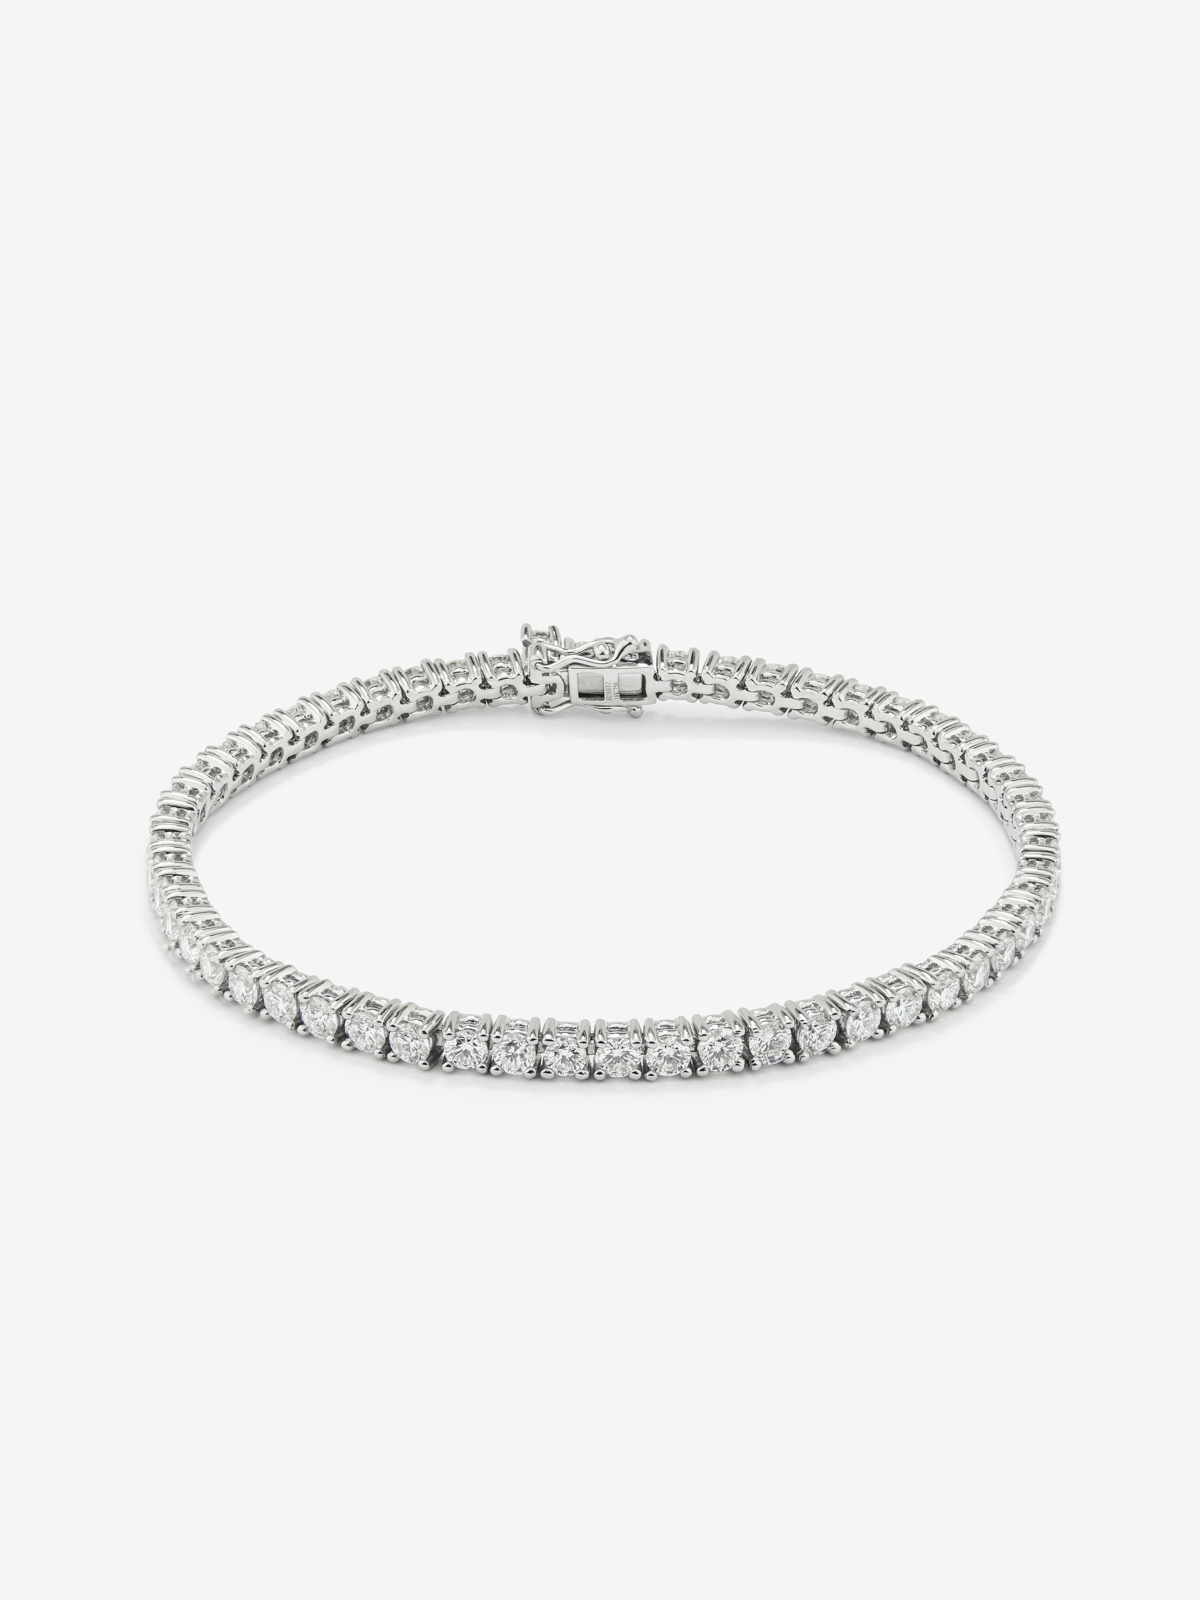 18K white gold bracelet with white diamonds in 5.7 cts